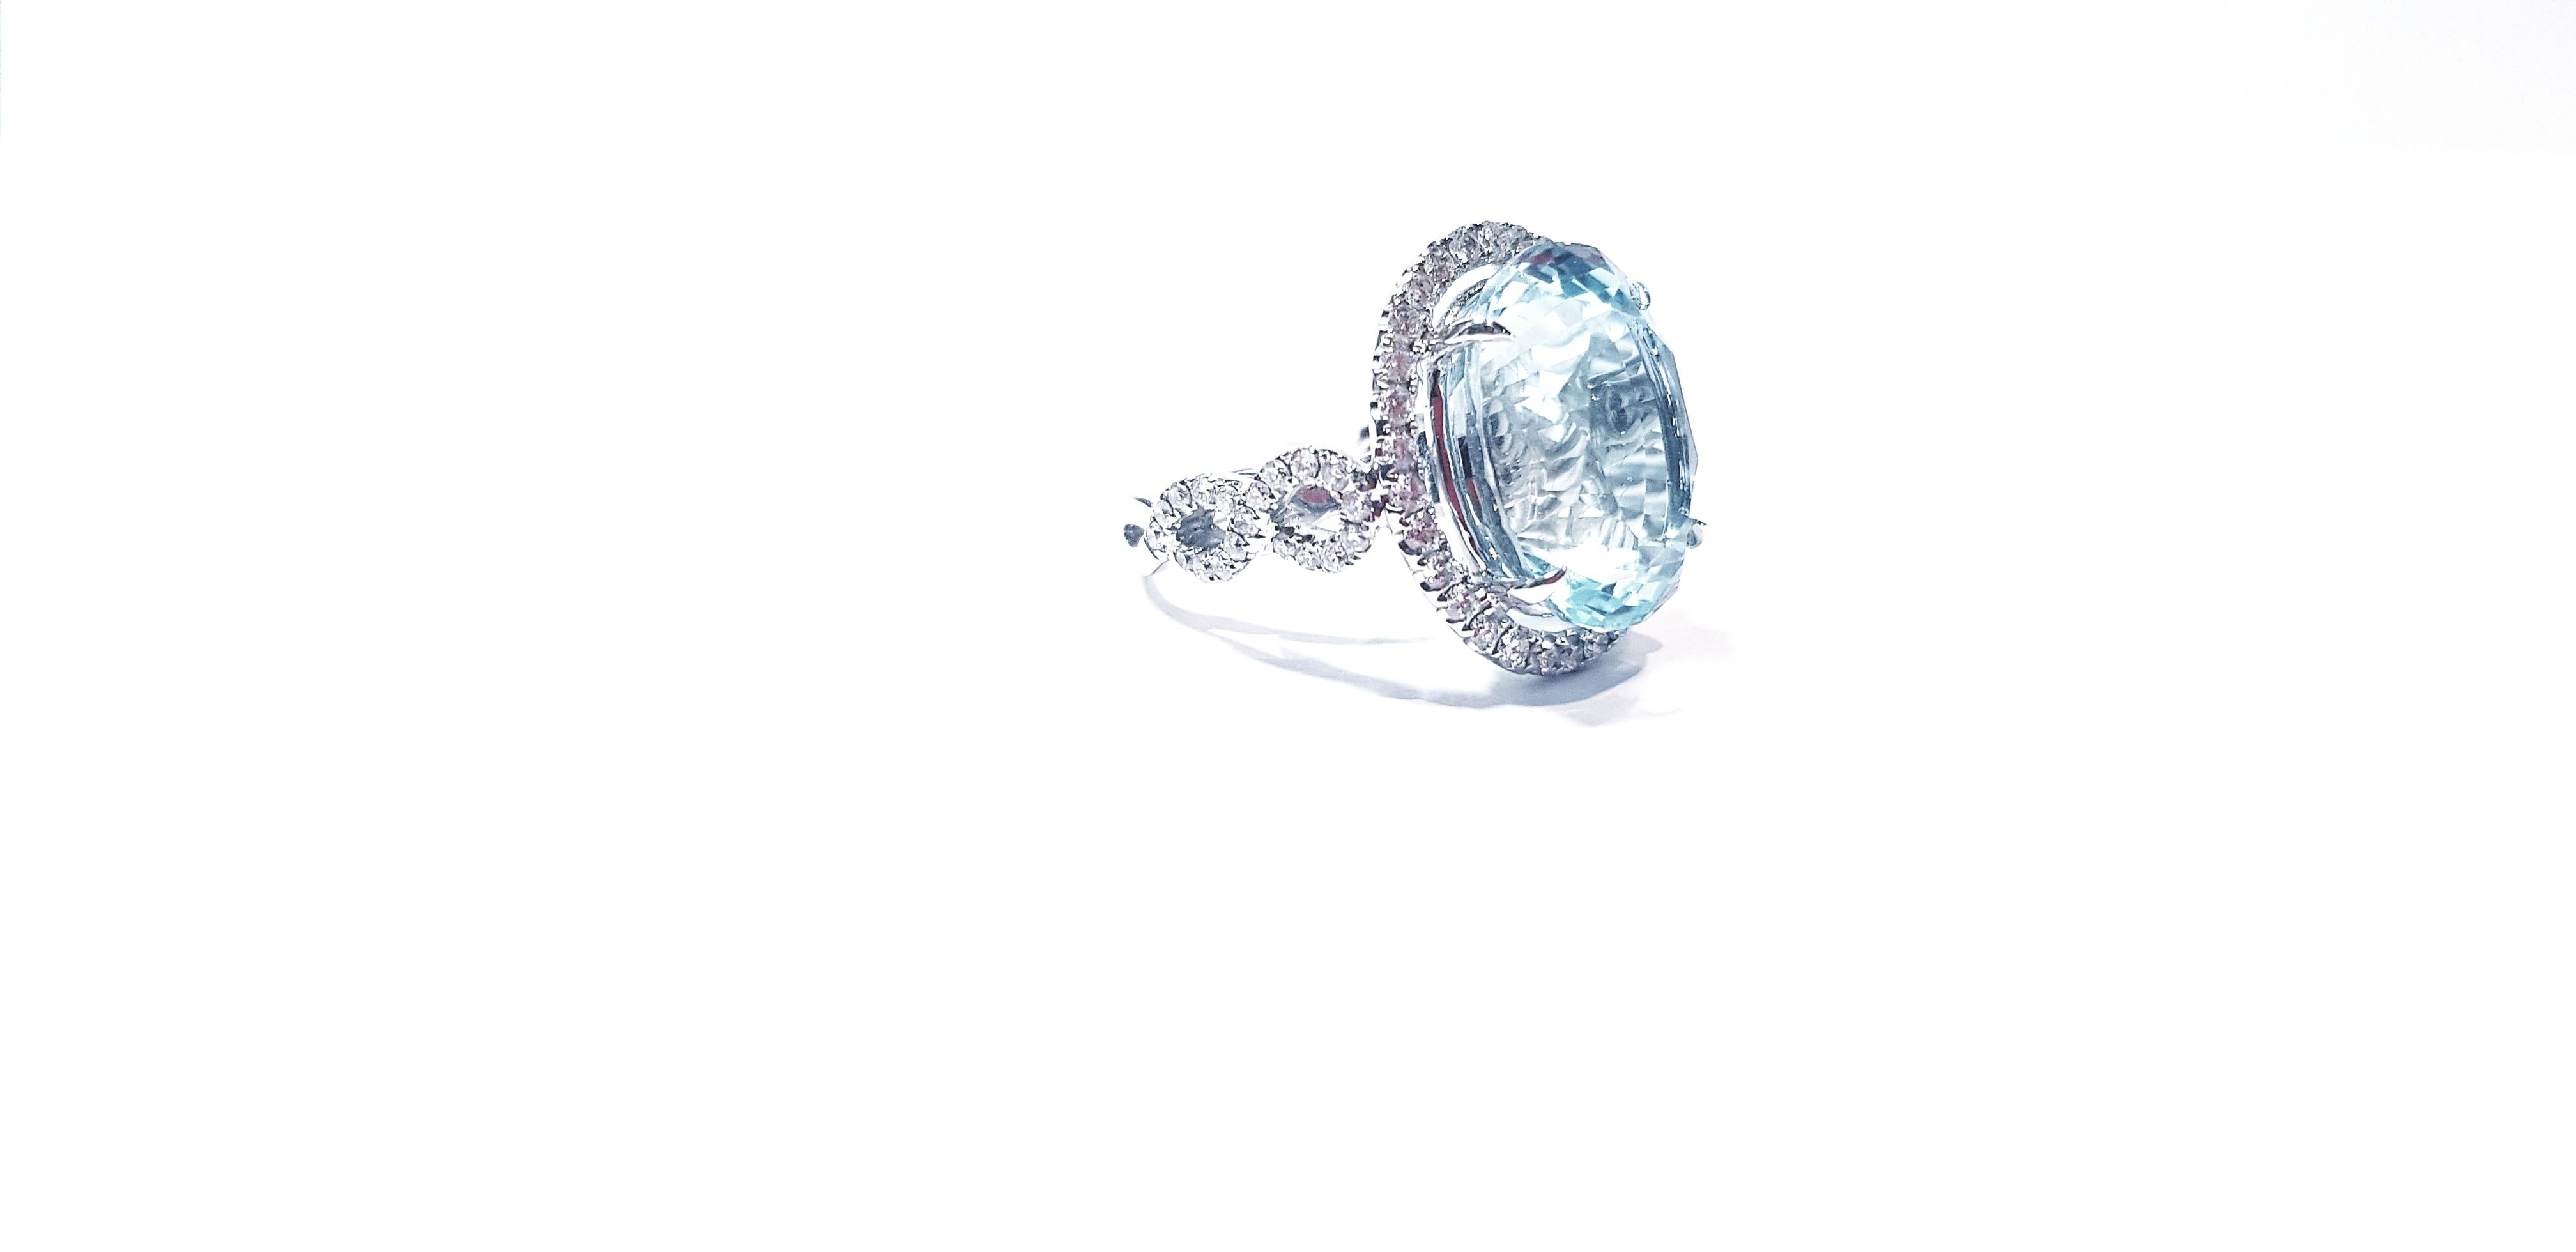 Superb quality rare Aquamarine and diamond cocktail ring in 18ct white gold.
An exquisite one of a kind Euphoria Jewels creation; a delicate balance between old-world charm and cutting-edge modern contemporary design.
Euphoria Jewels only embraces